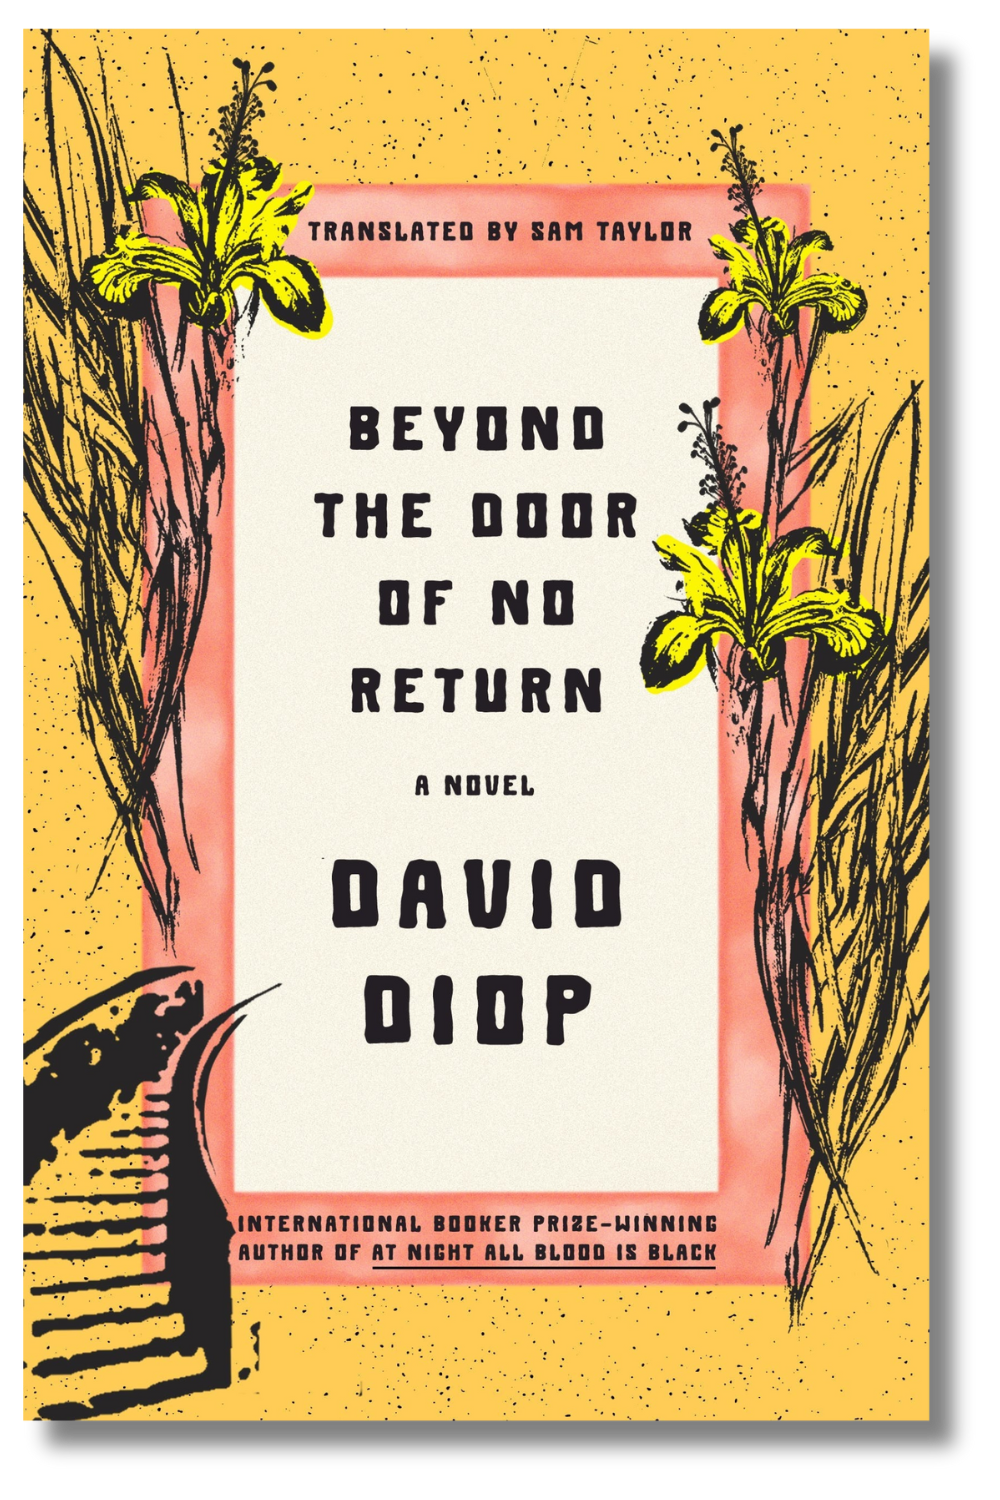 The cover of "Beyond the Door of No Return" by David Diop, translated by Sam Taylor